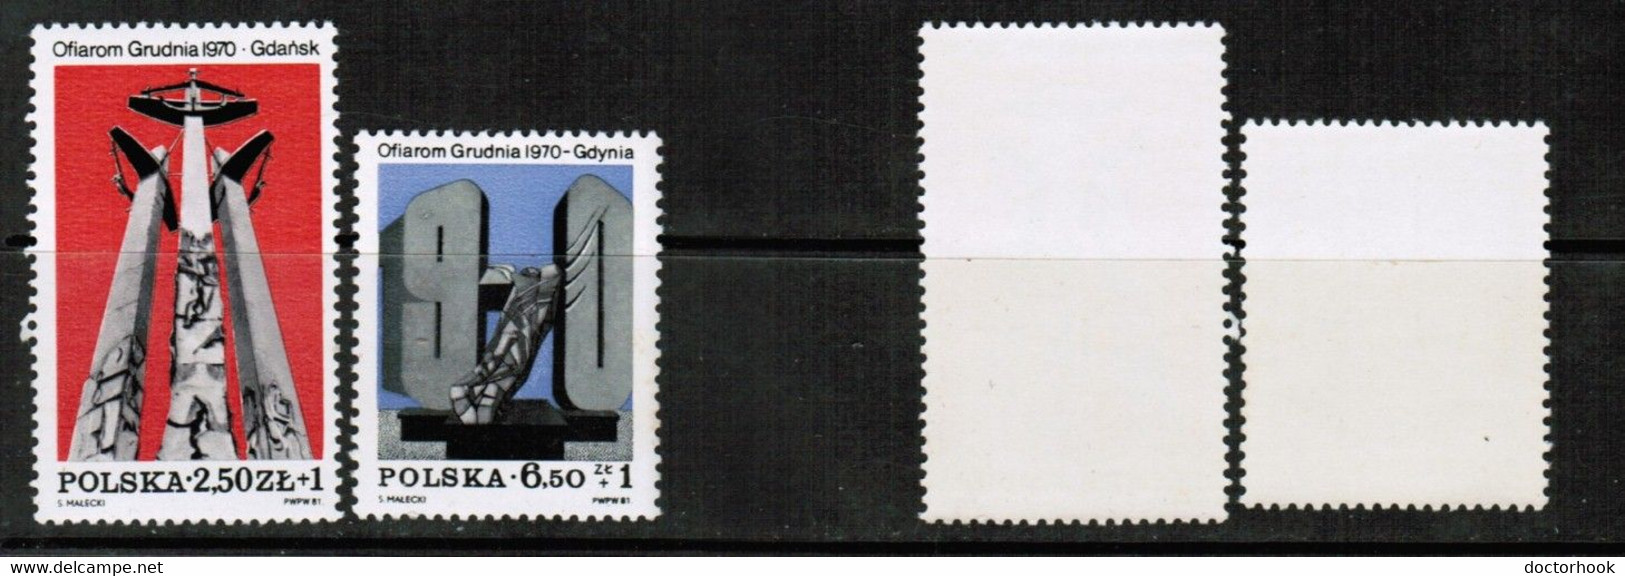 POLAND   Scott # B 140-1** MINT NH (CONDITION AS PER SCAN) (WW-1-25) - Unused Stamps